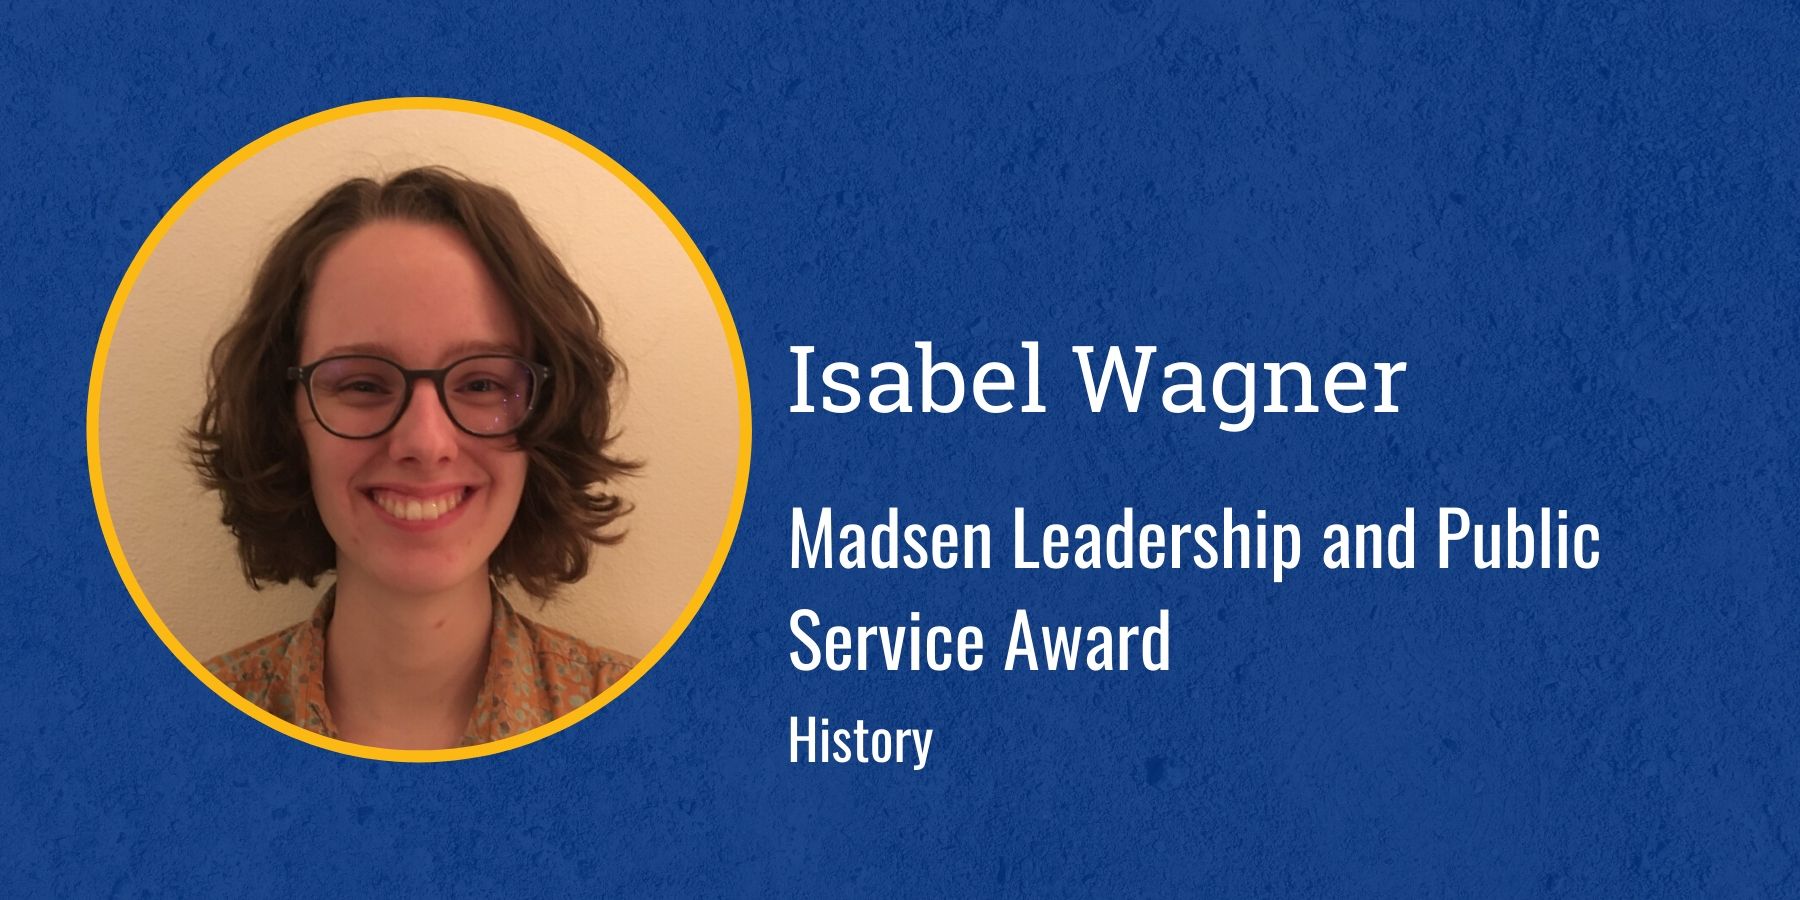 Photo of Isabel Wagner and text Madsen Leadership and Public Service Award, History